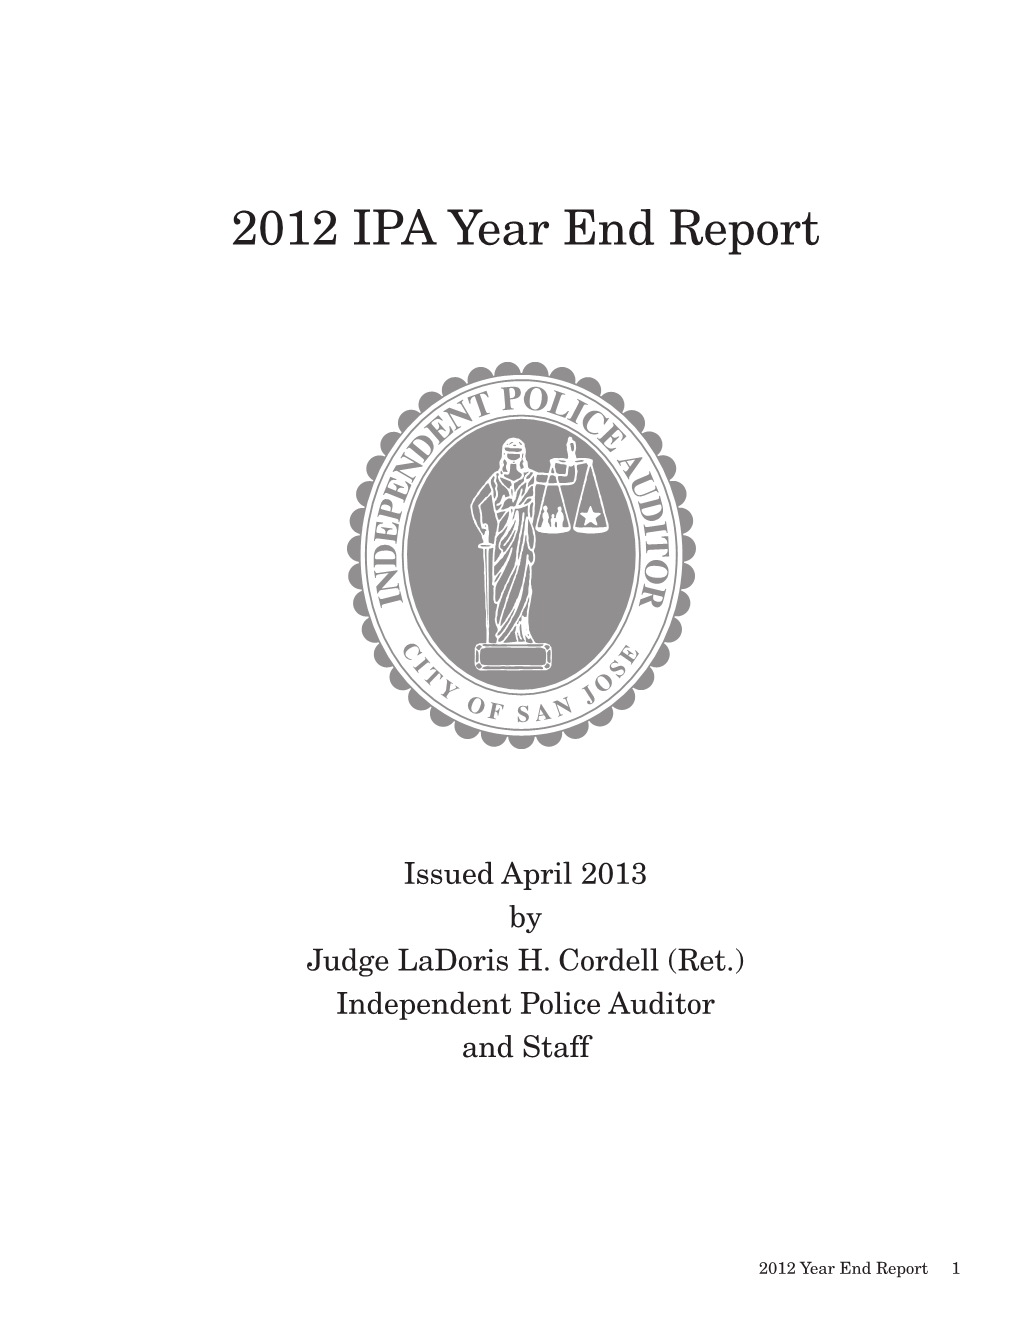 2012 Year End Report 1 Independent Police Auditor & Staff